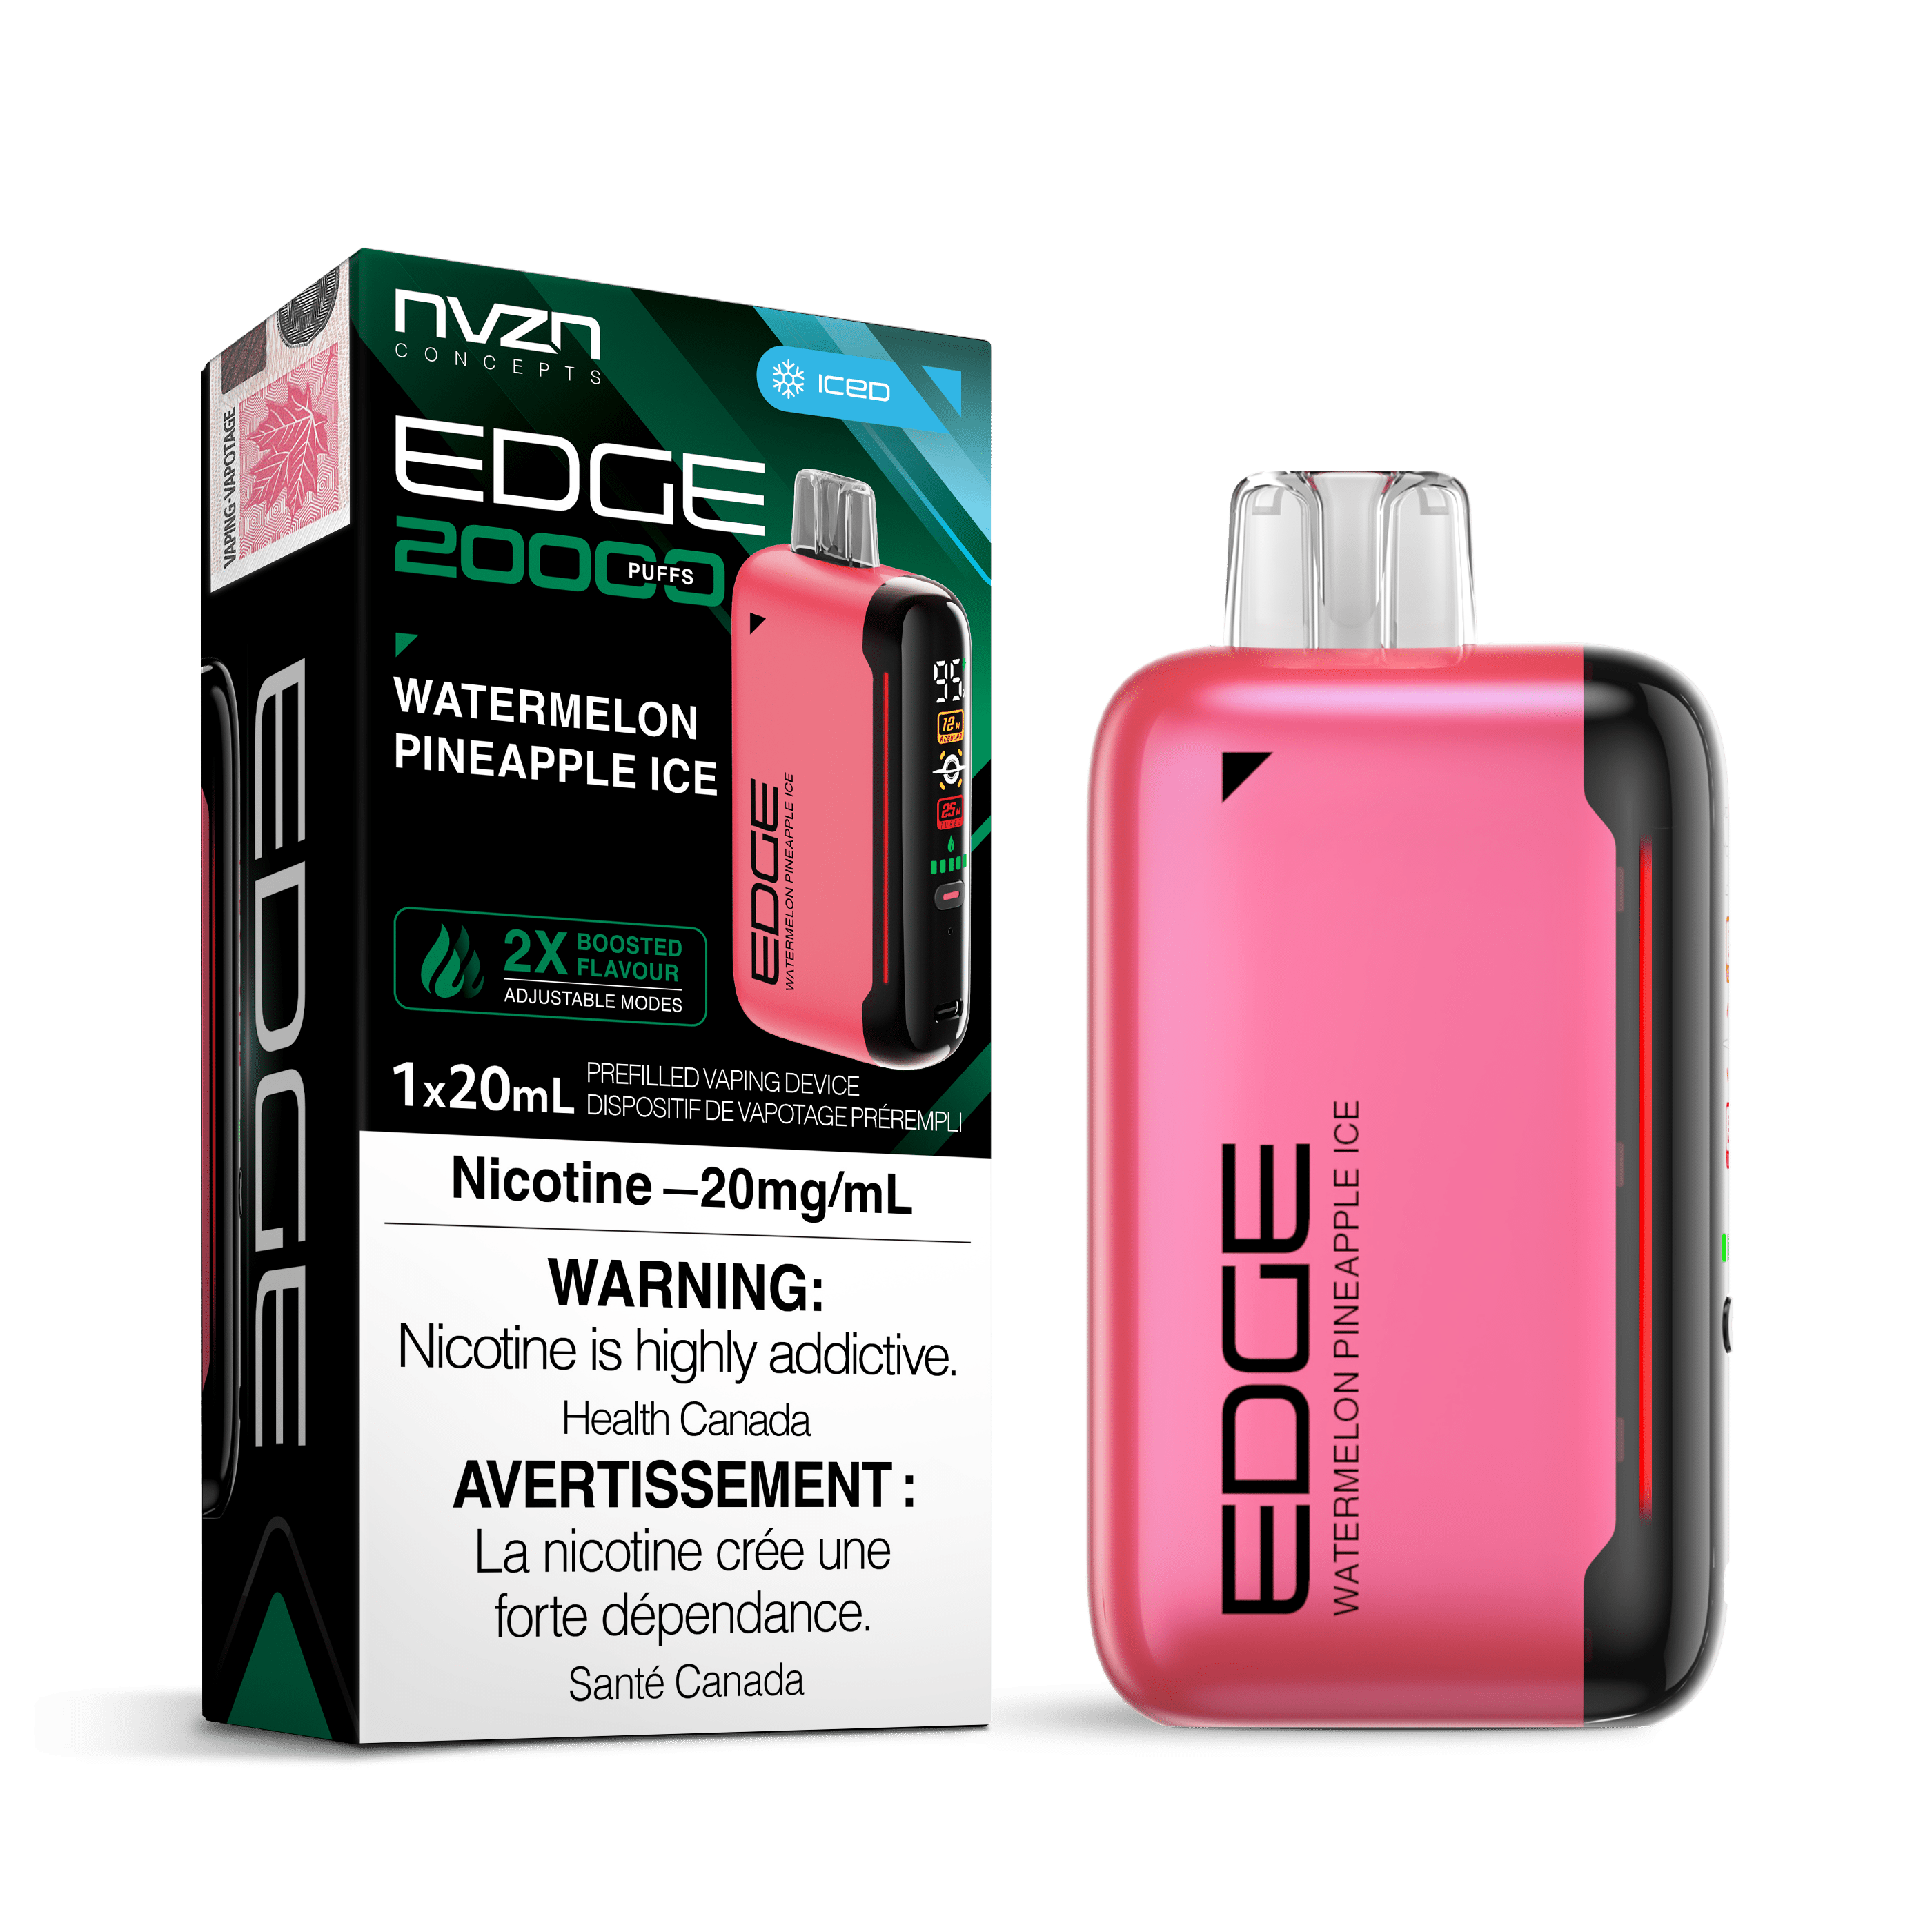 Edge By NVZN - Watermelon Pineapple Ice Disposable Vape available on Canada online vape shop